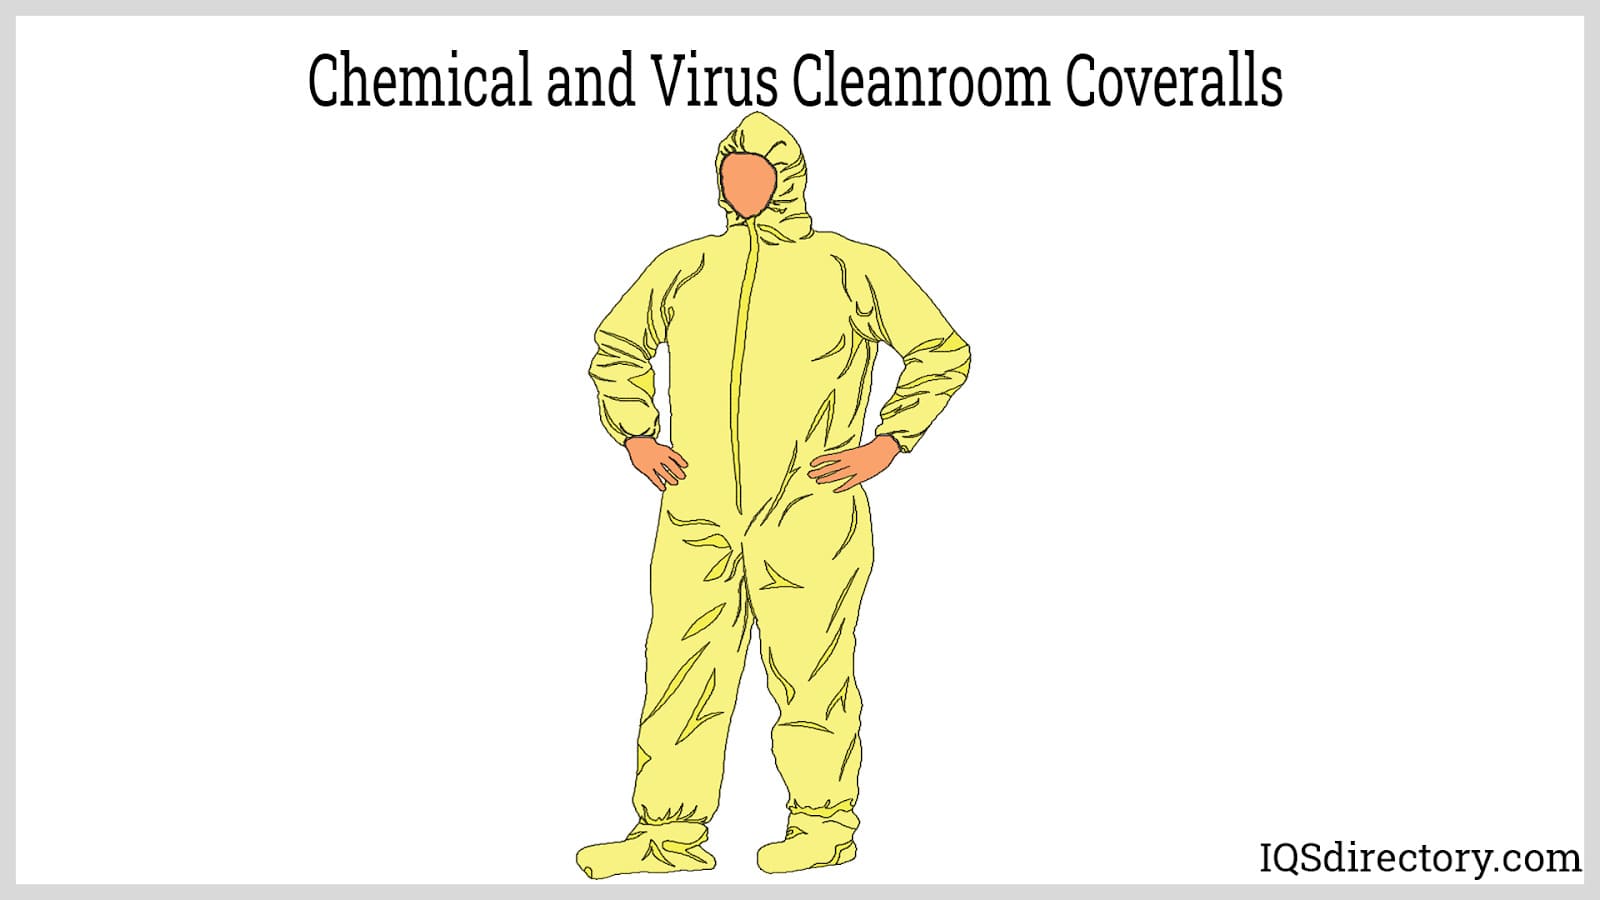 Chemical and Virus Cleanroom Coveralls